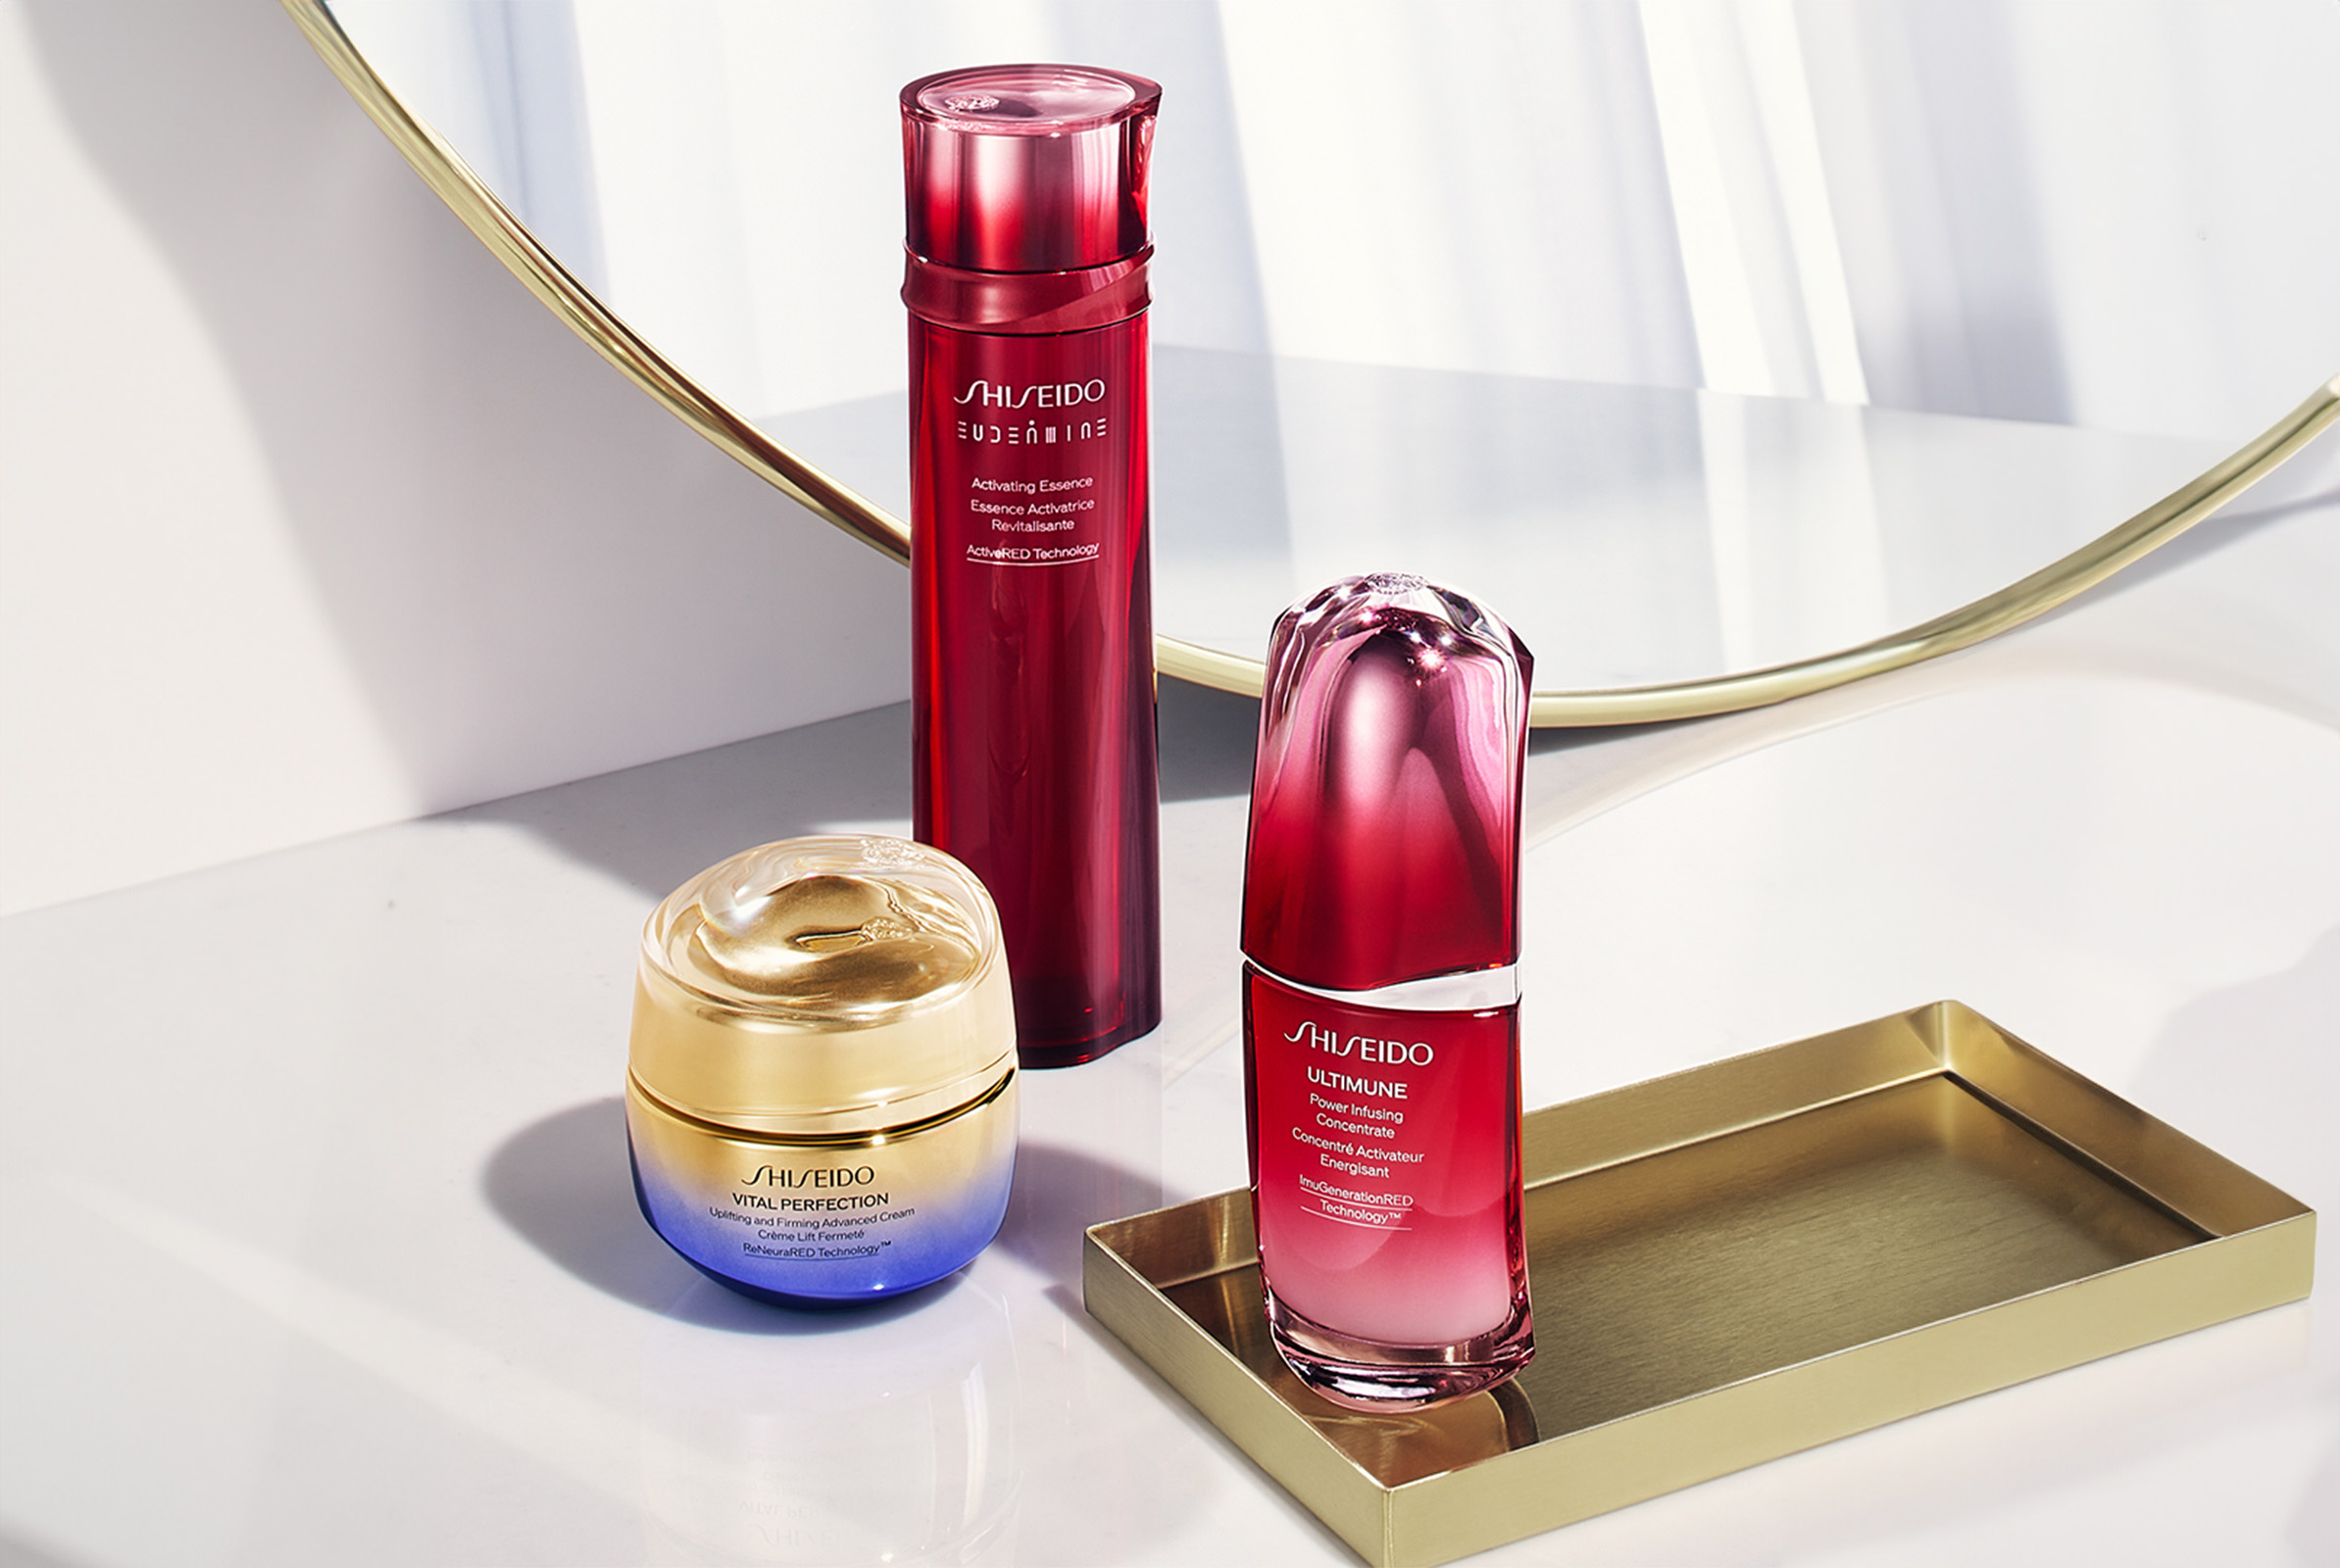 The Shiseido VITAL PERFECTION treatment with the Eudermine Activating Essence and ULTIMUNE Power Infusing Concentrate in a red bottle, while VITAL PERFECTION Uplifting and Firming Advanced Cream in a gradient violet to gold jar.